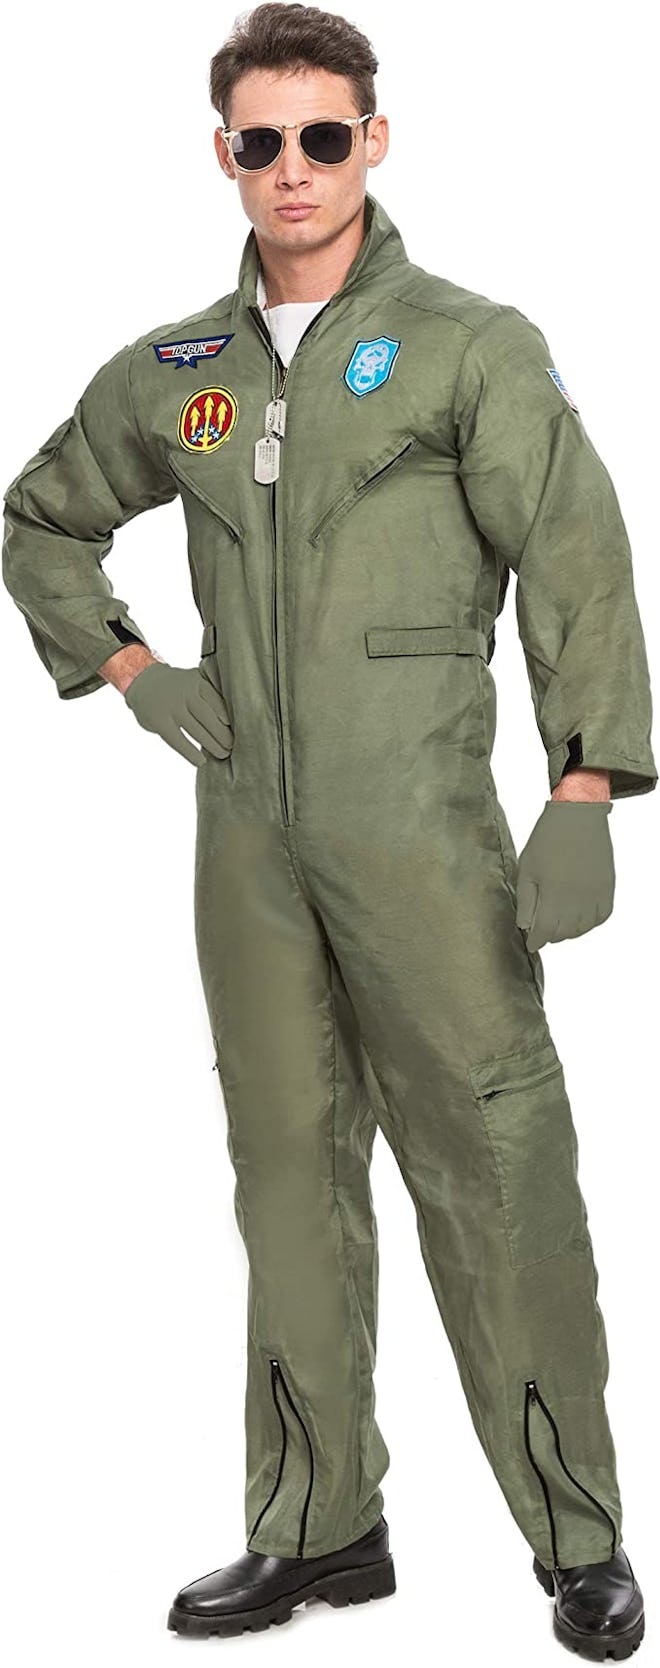 A Goose Top Gun costume requires a green flight suit, aviator glasses, and dog tags.